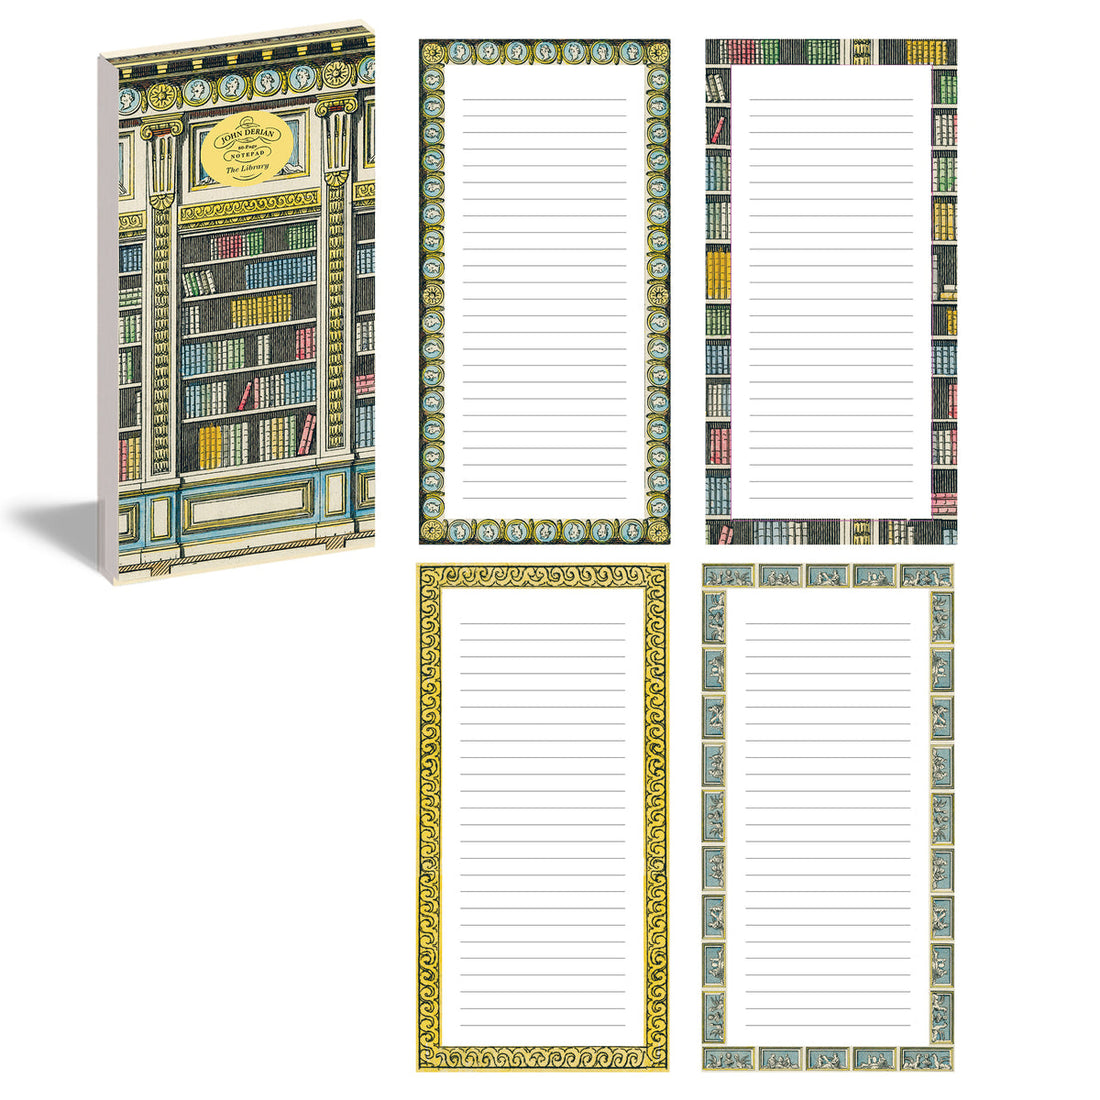 Four John Derian: The Library Notepads featuring antique prints, with vintage bookshelf themes and ornate frame designs.